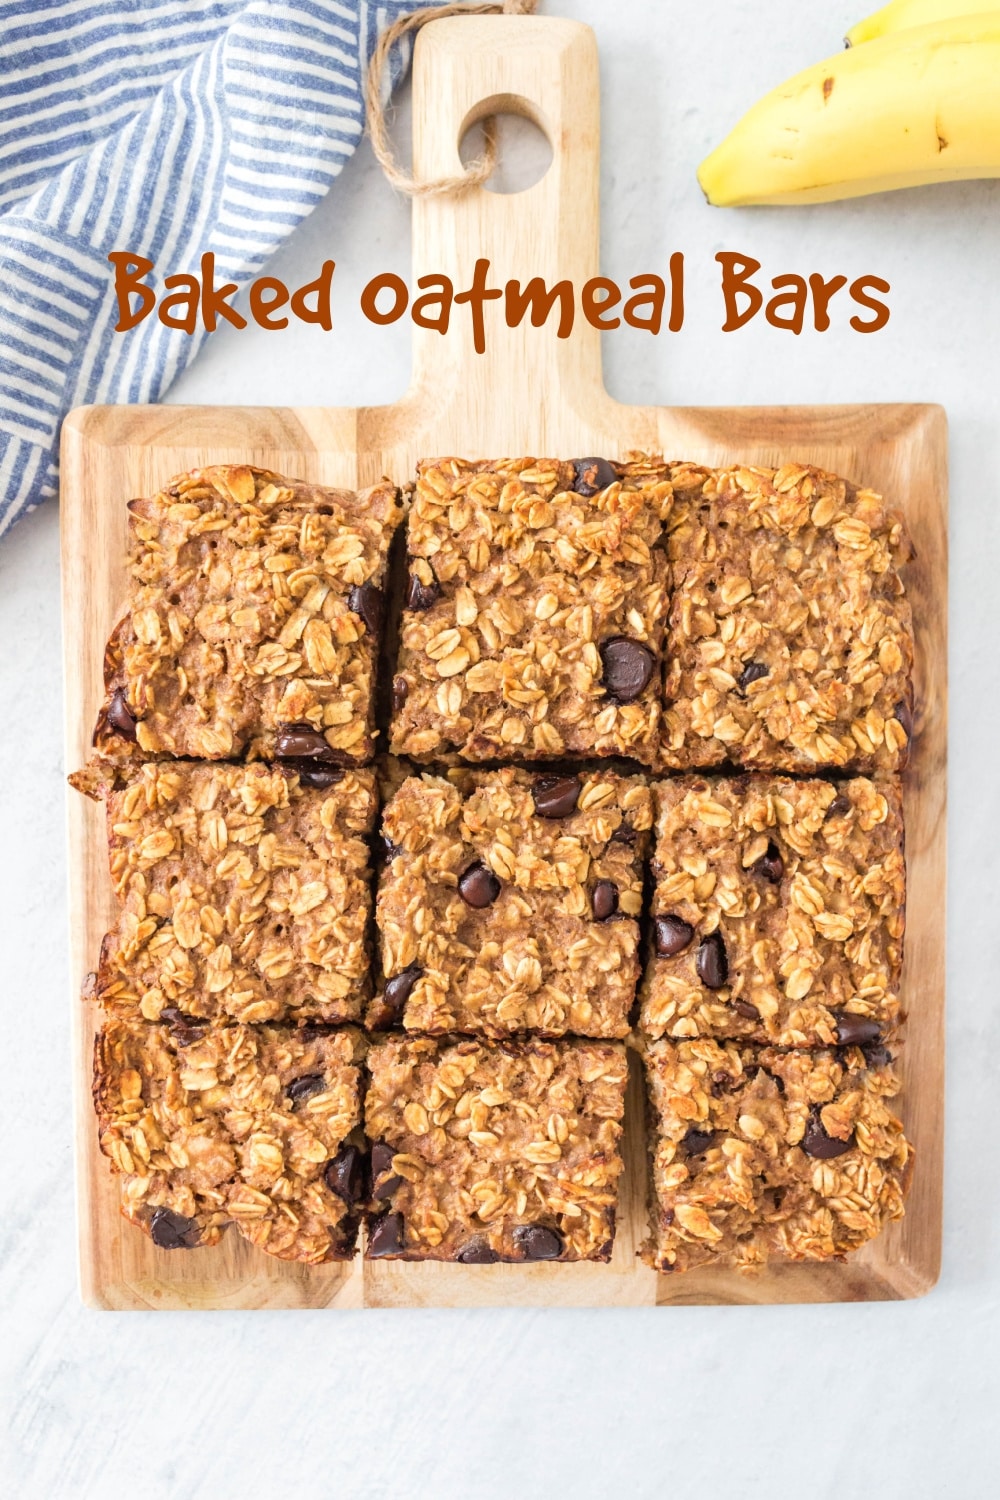 These baked oatmeal bars are not your average breakfast squares. Inside you'll find a moist, creamy interior brimming with breakfast-friendly sweetness.  via @cmpollak1